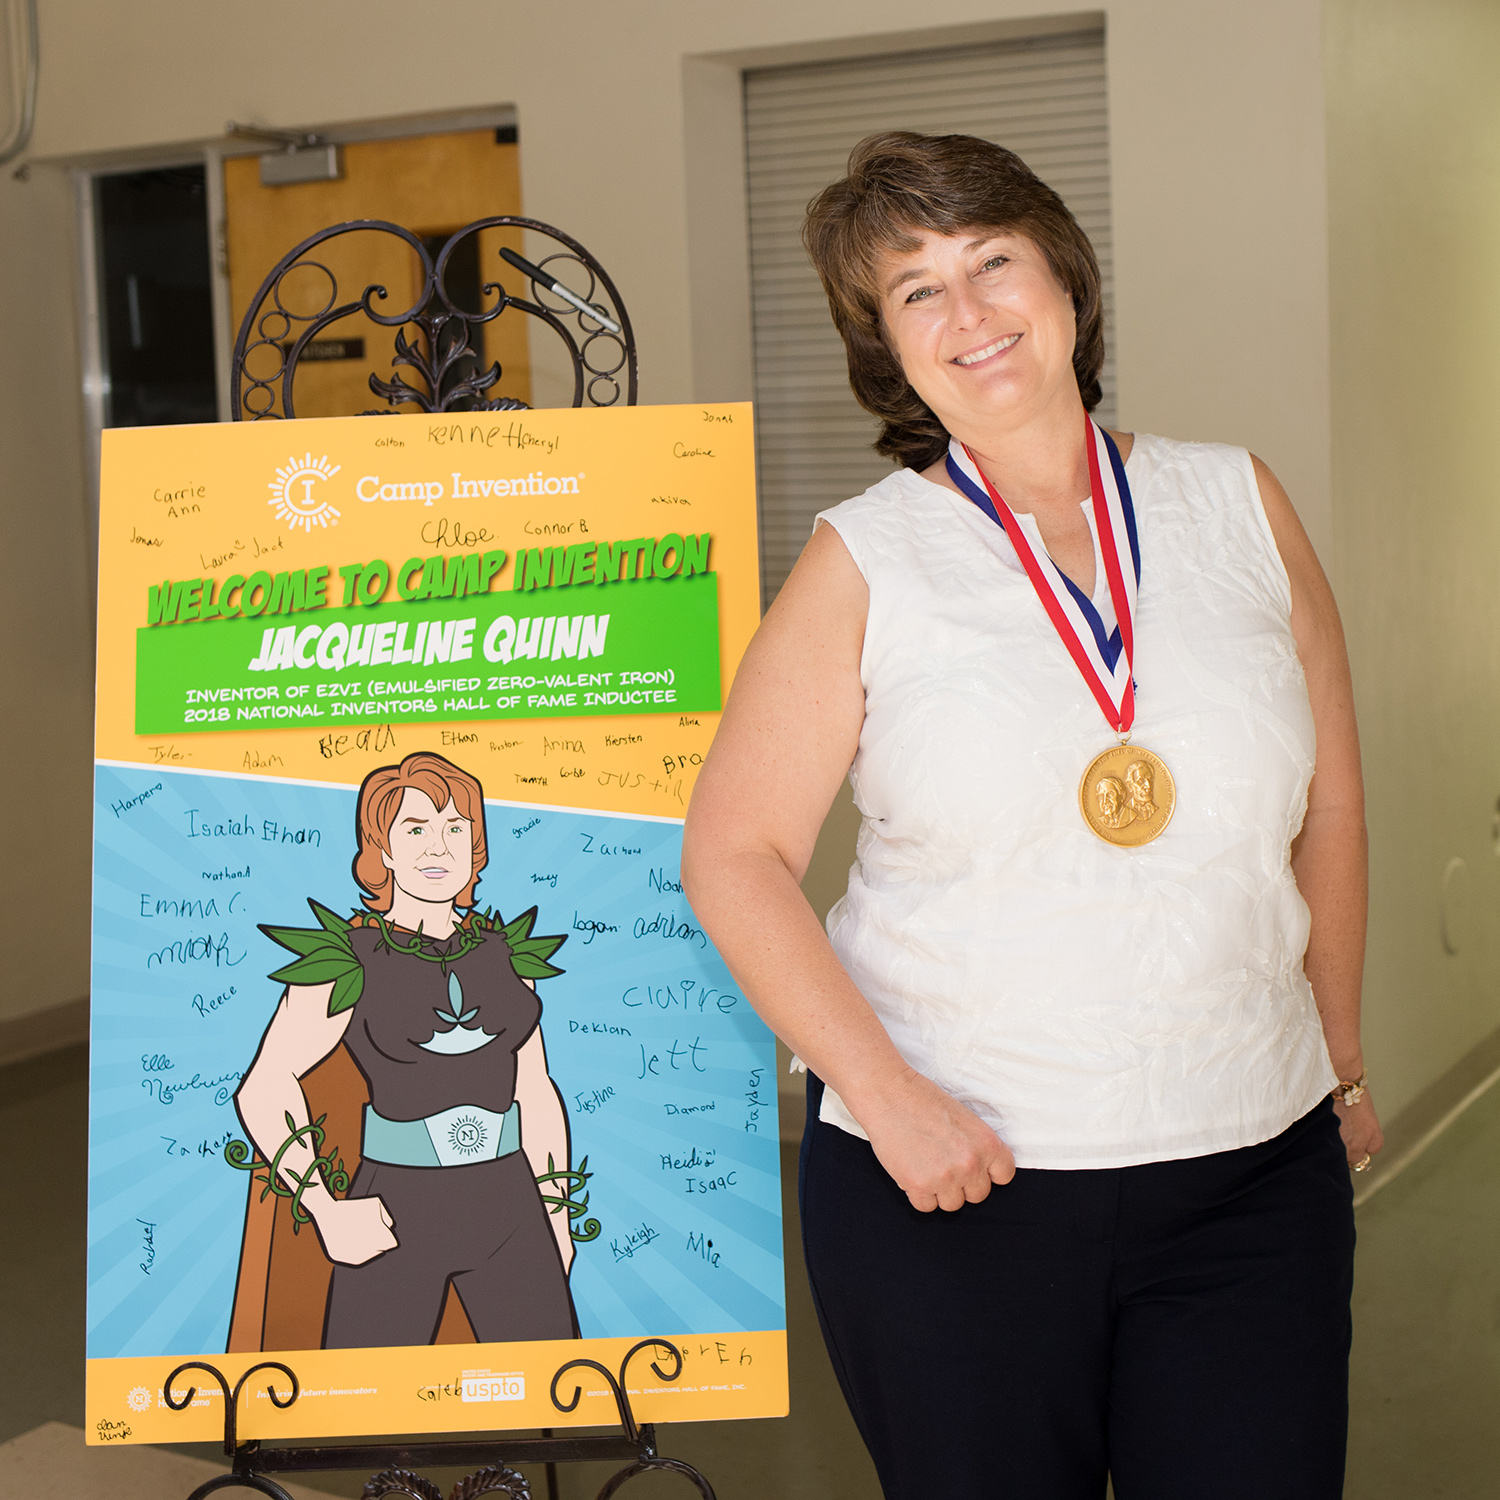 Jackie Quinn poses with her Camp Invention poster, autographed by campers